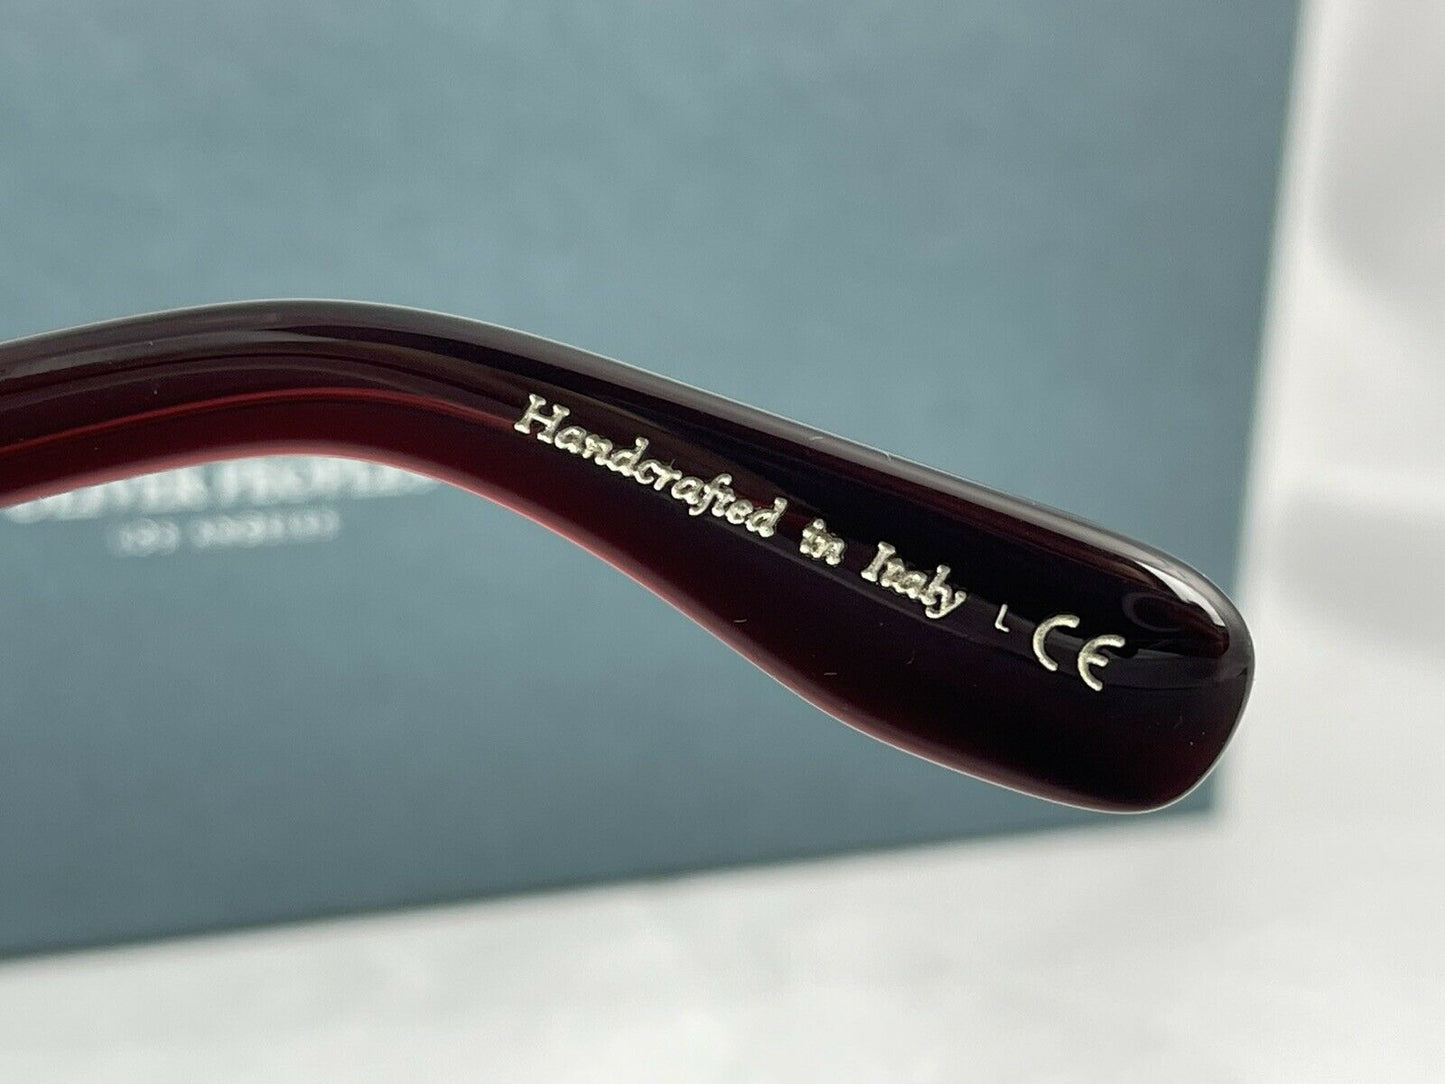 Oliver Peoples Cary Grant OV5413SU Bordeaux Bark / Carbon Gray size 48 New